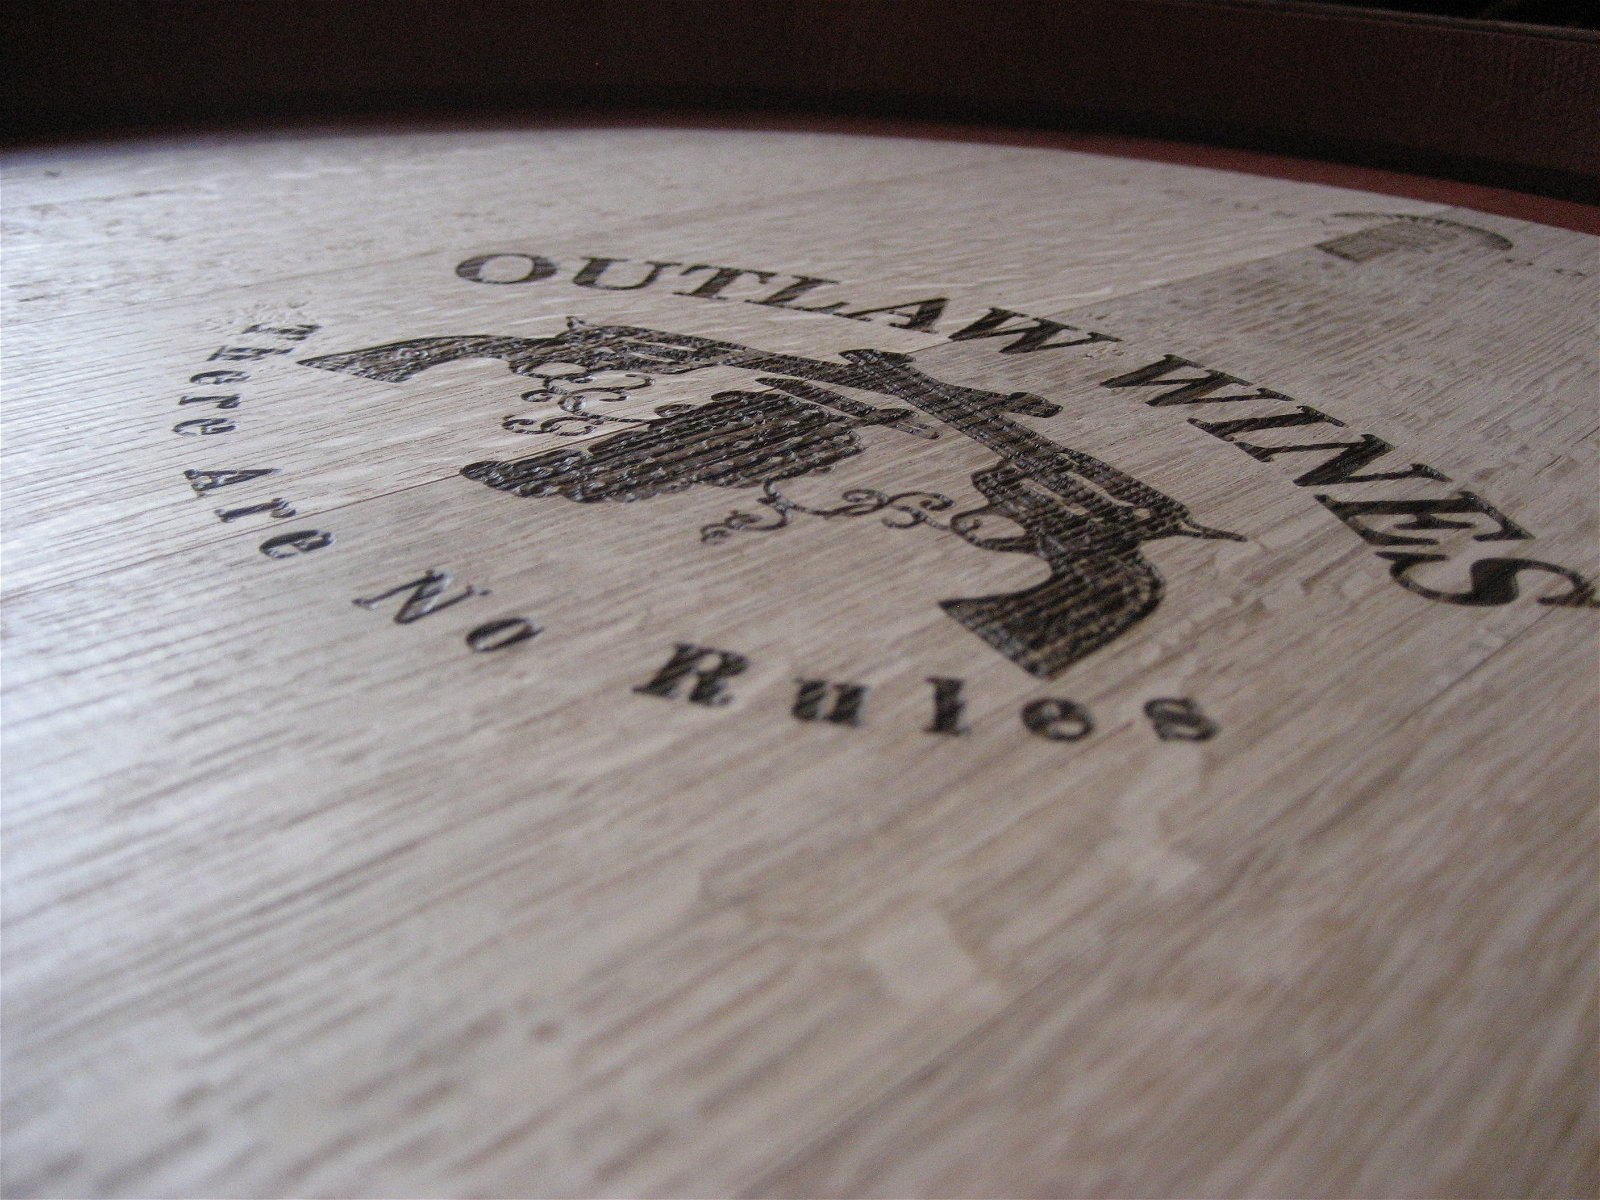 Outlaw Wines - Pubs Sydney